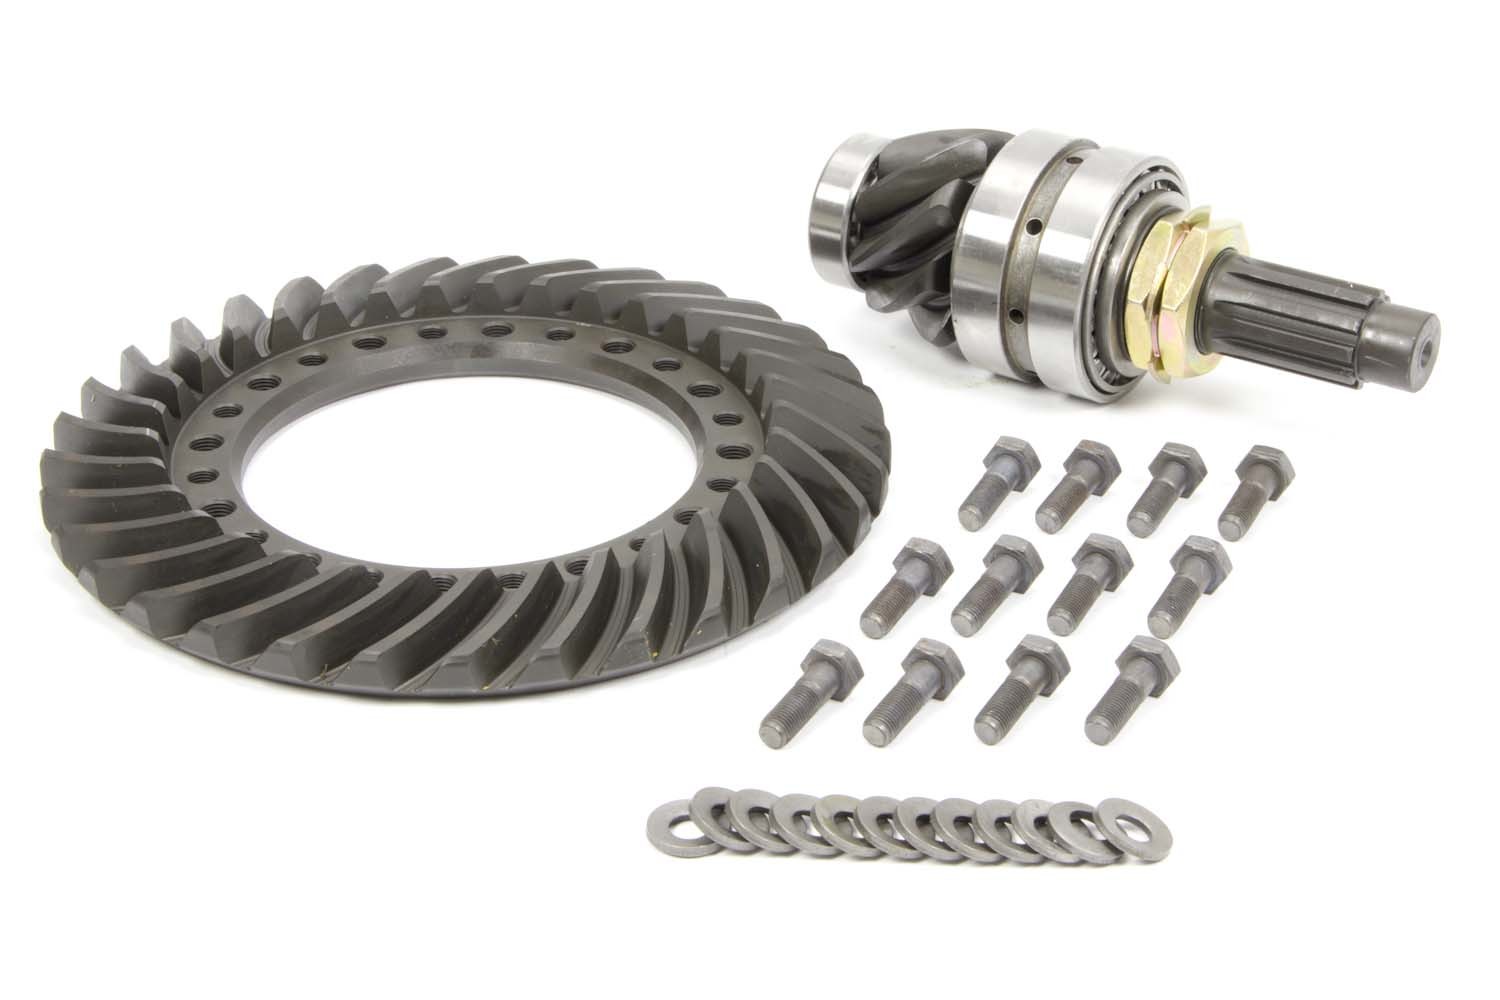 Winters Performance 5715 Ring and Pinion, 4.11 Ratio, 10 Spline, Bearings Included, Steel, Winters 12-Bolt 10 in Quick Change, Kit